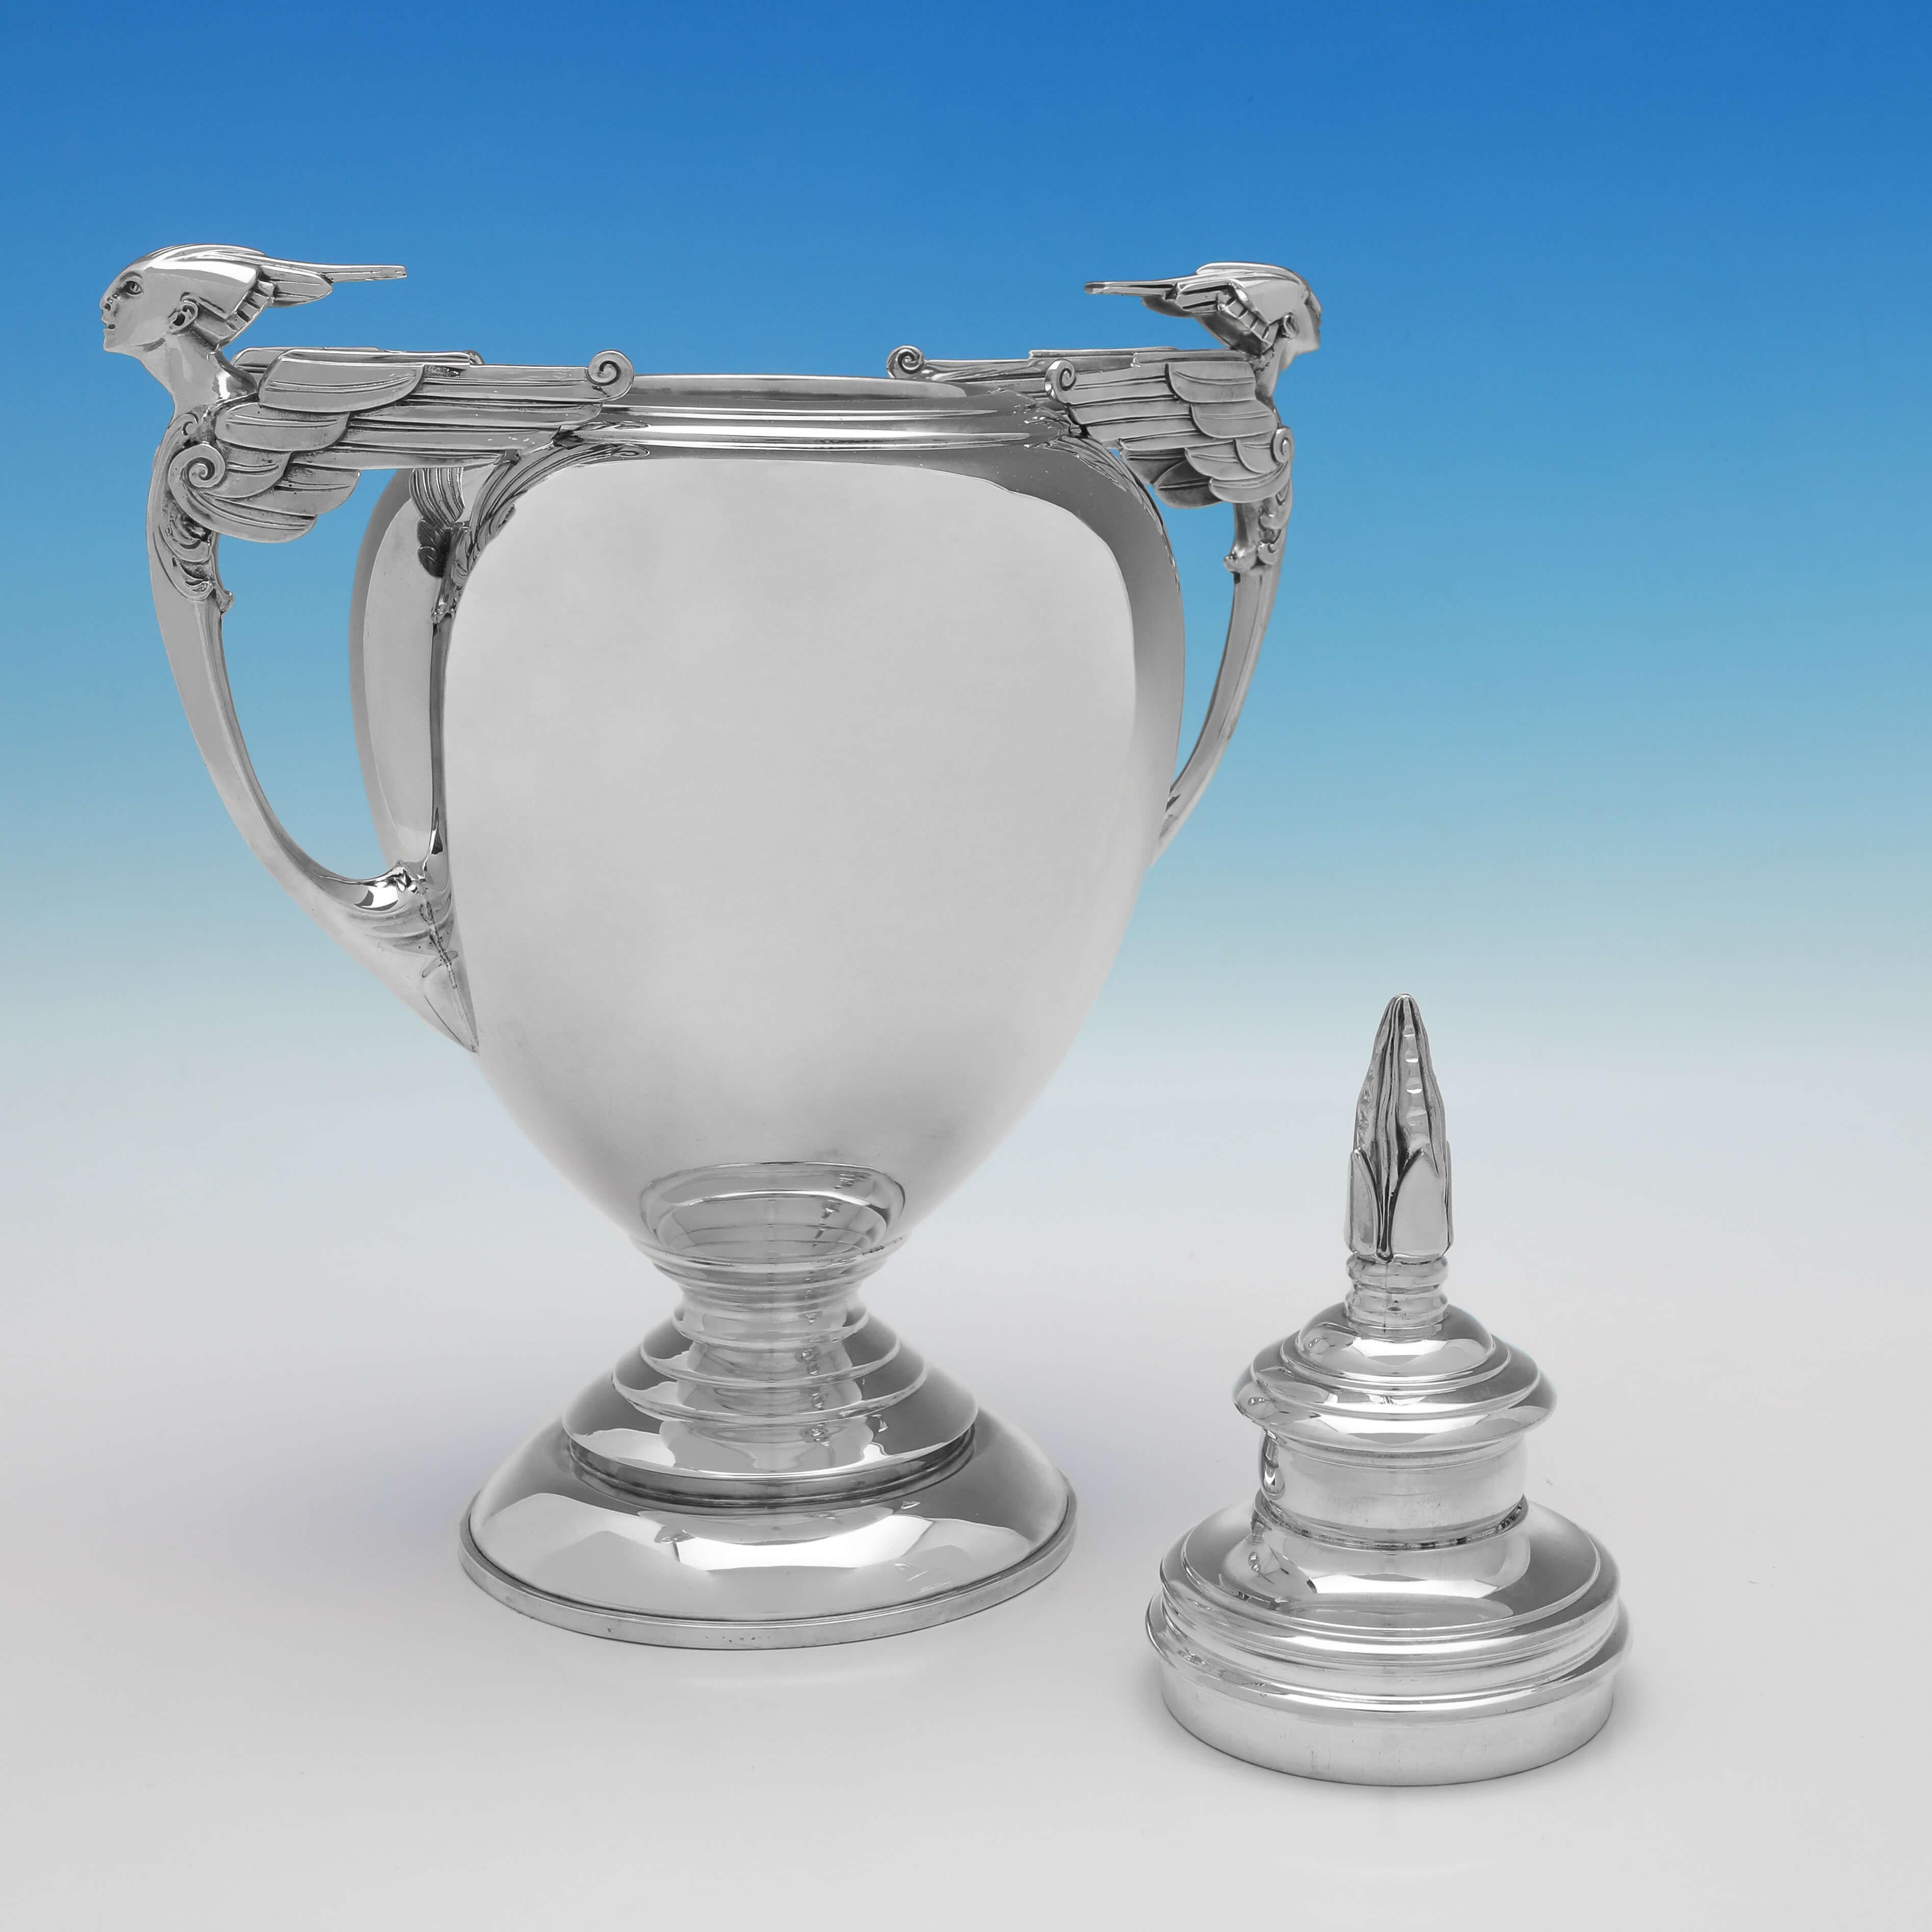 English Amazing Art Deco Period Sterling Silver Trophy - Hallmarked in 1931 For Sale